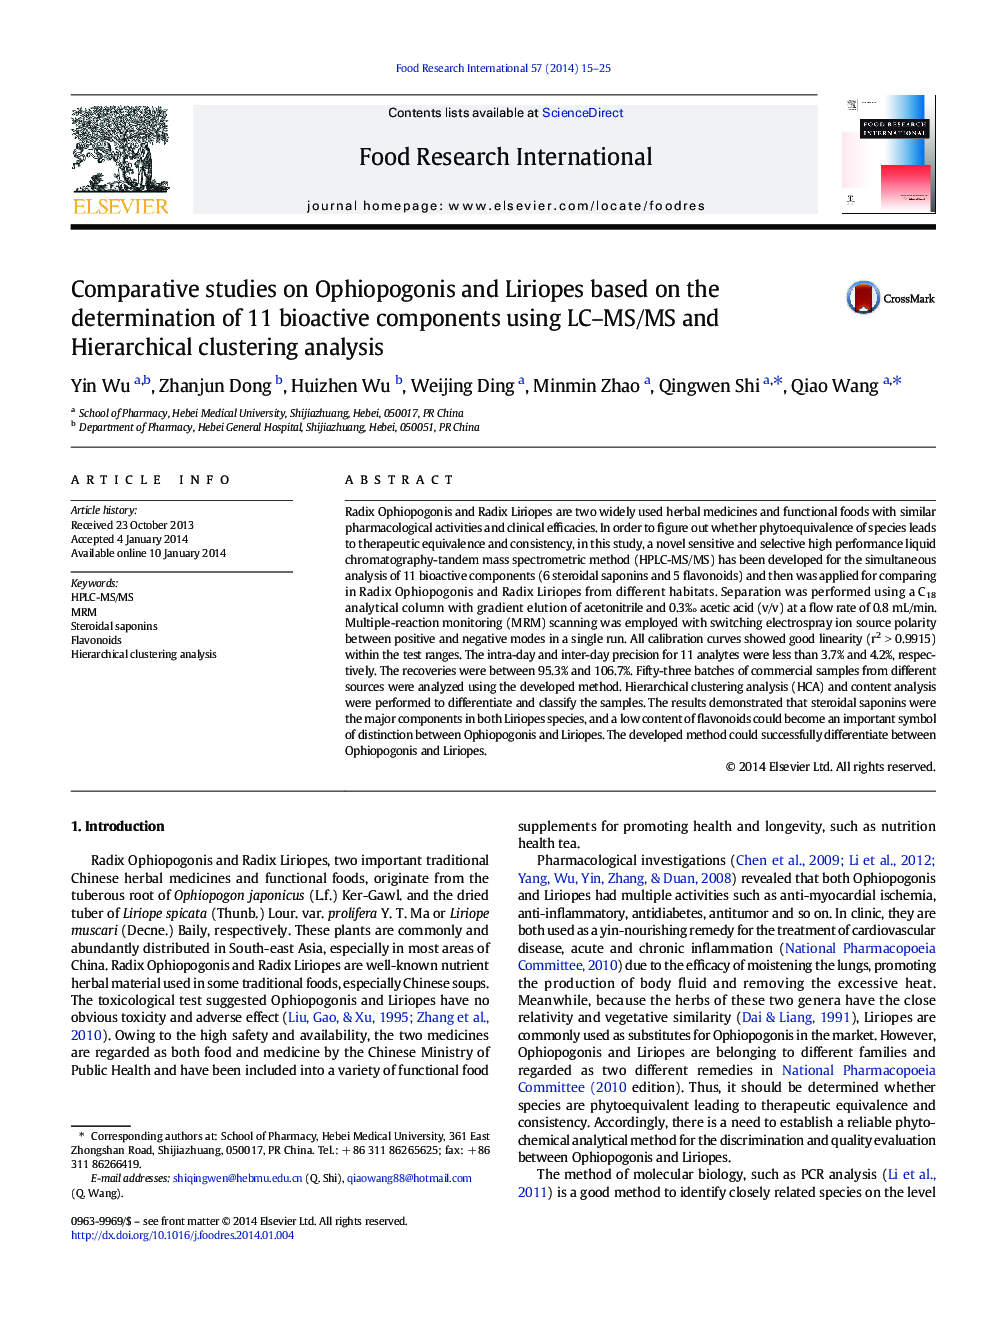 Comparative studies on Ophiopogonis and Liriopes based on the determination of 11 bioactive components using LC-MS/MS and Hierarchical clustering analysis